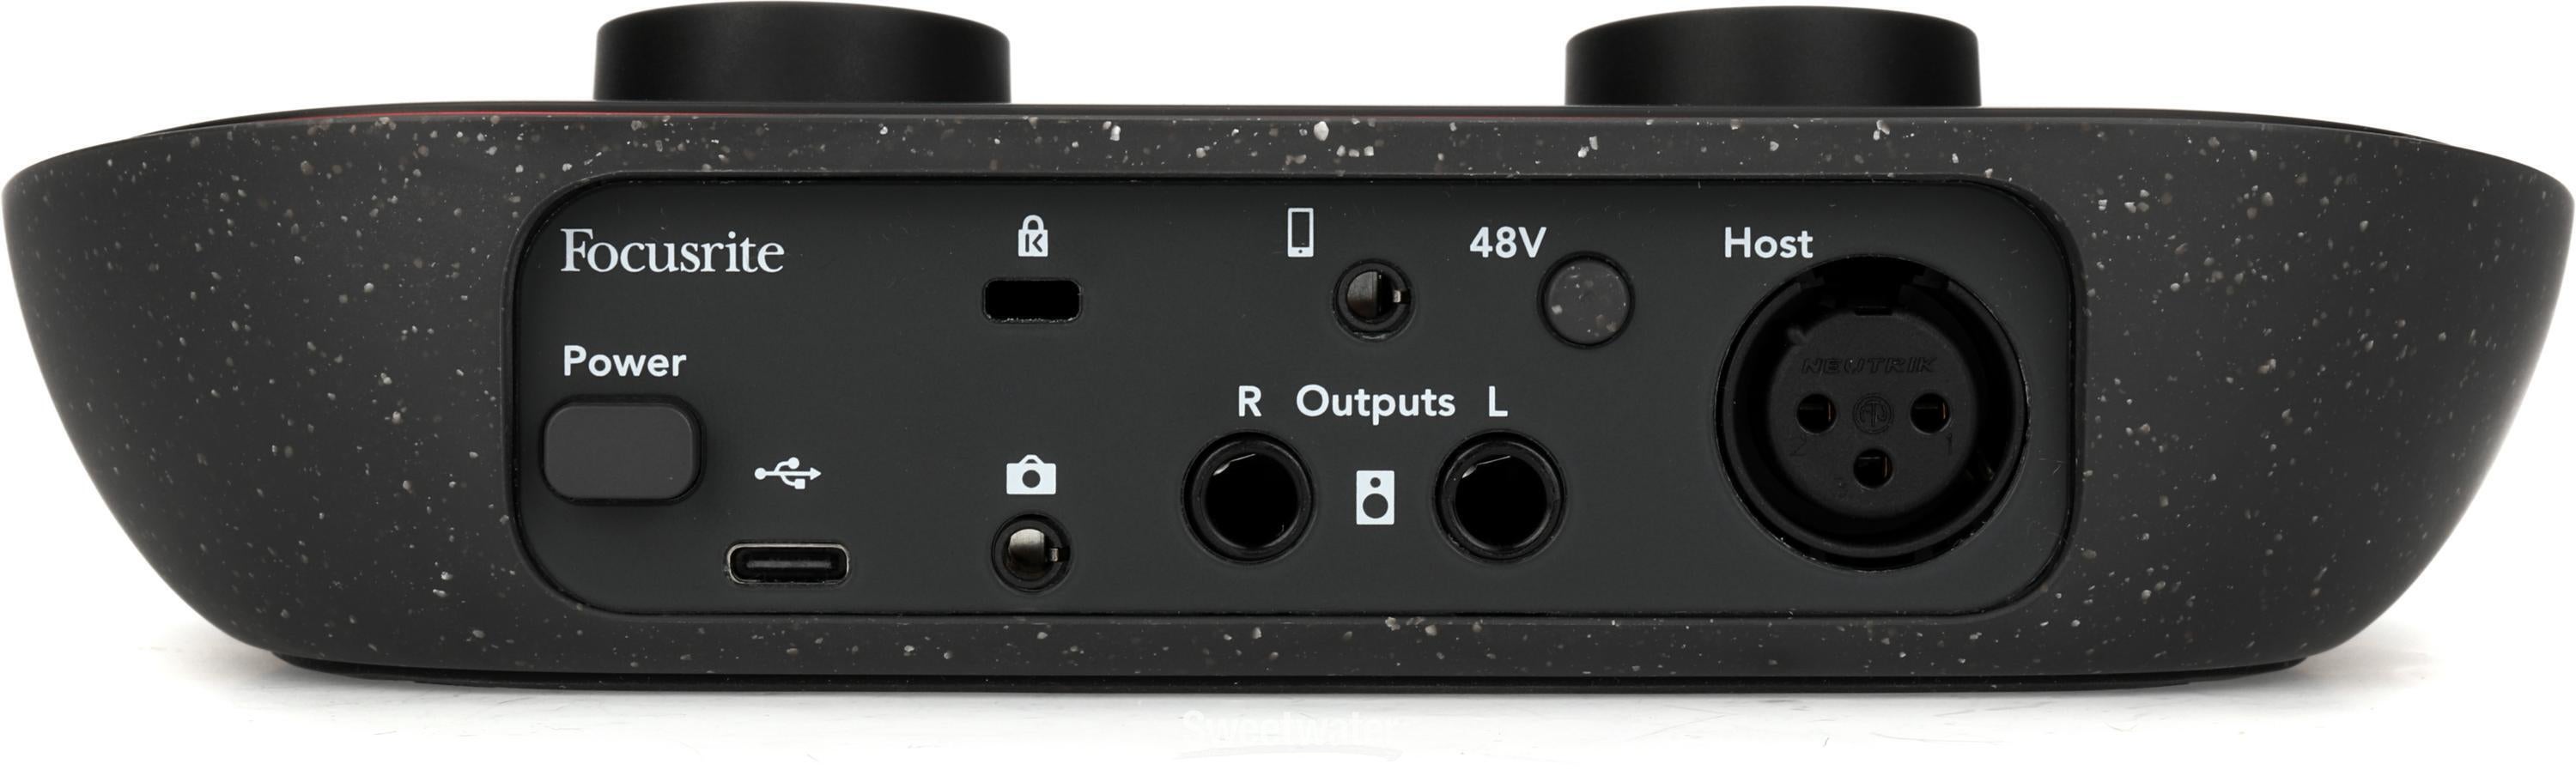 Focusrite Vocaster One USB-C Podcasting Audio Interface | Sweetwater